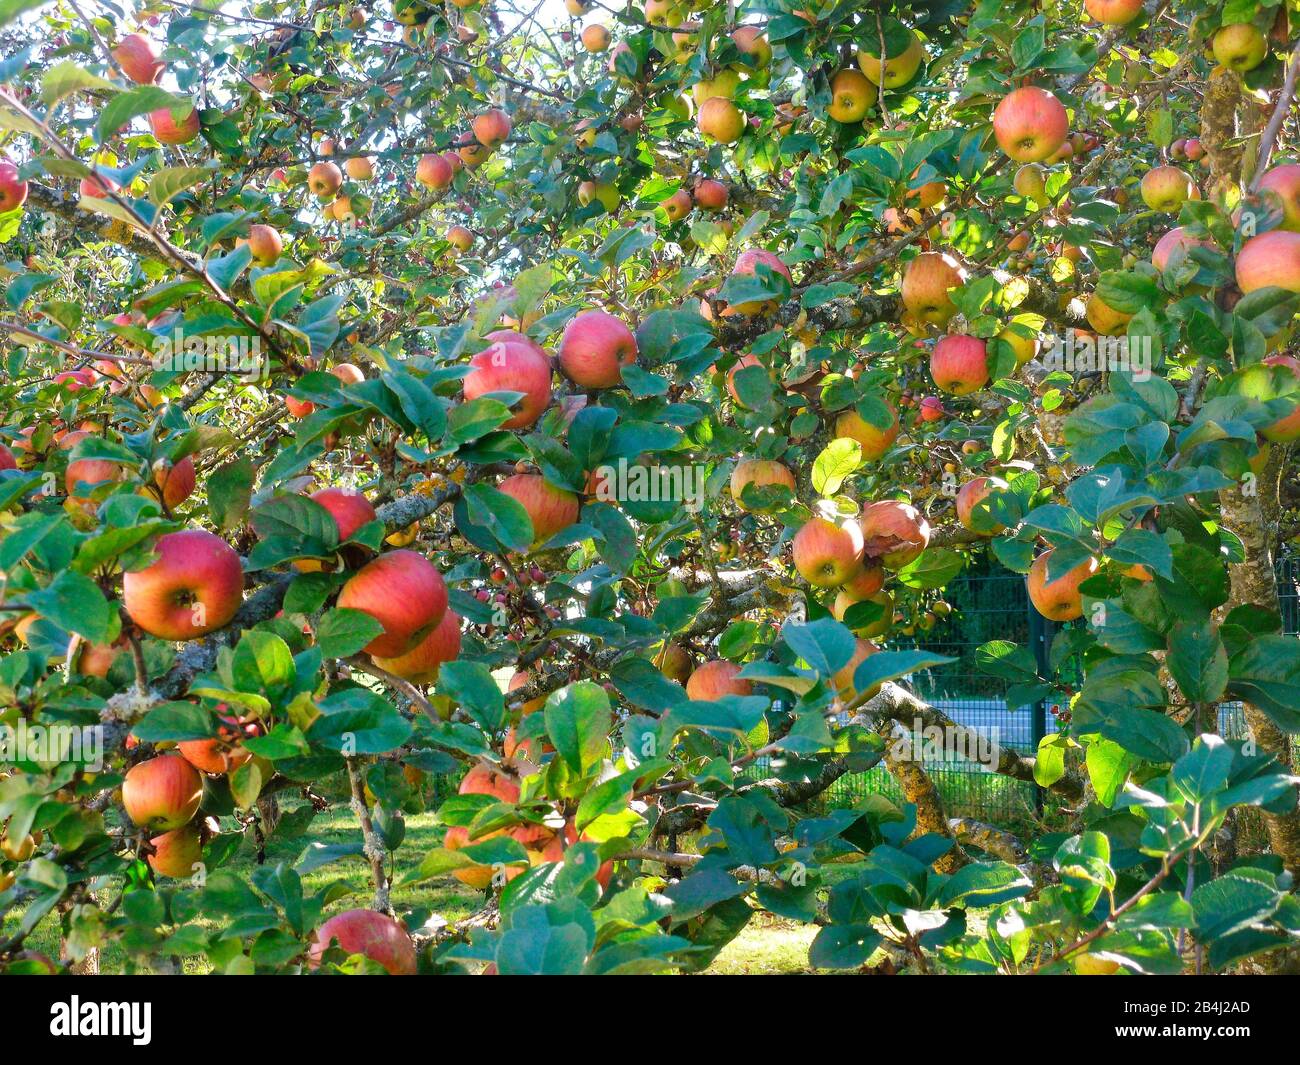 Germany, Bavaria, orchard meadow, apples Stock Photo